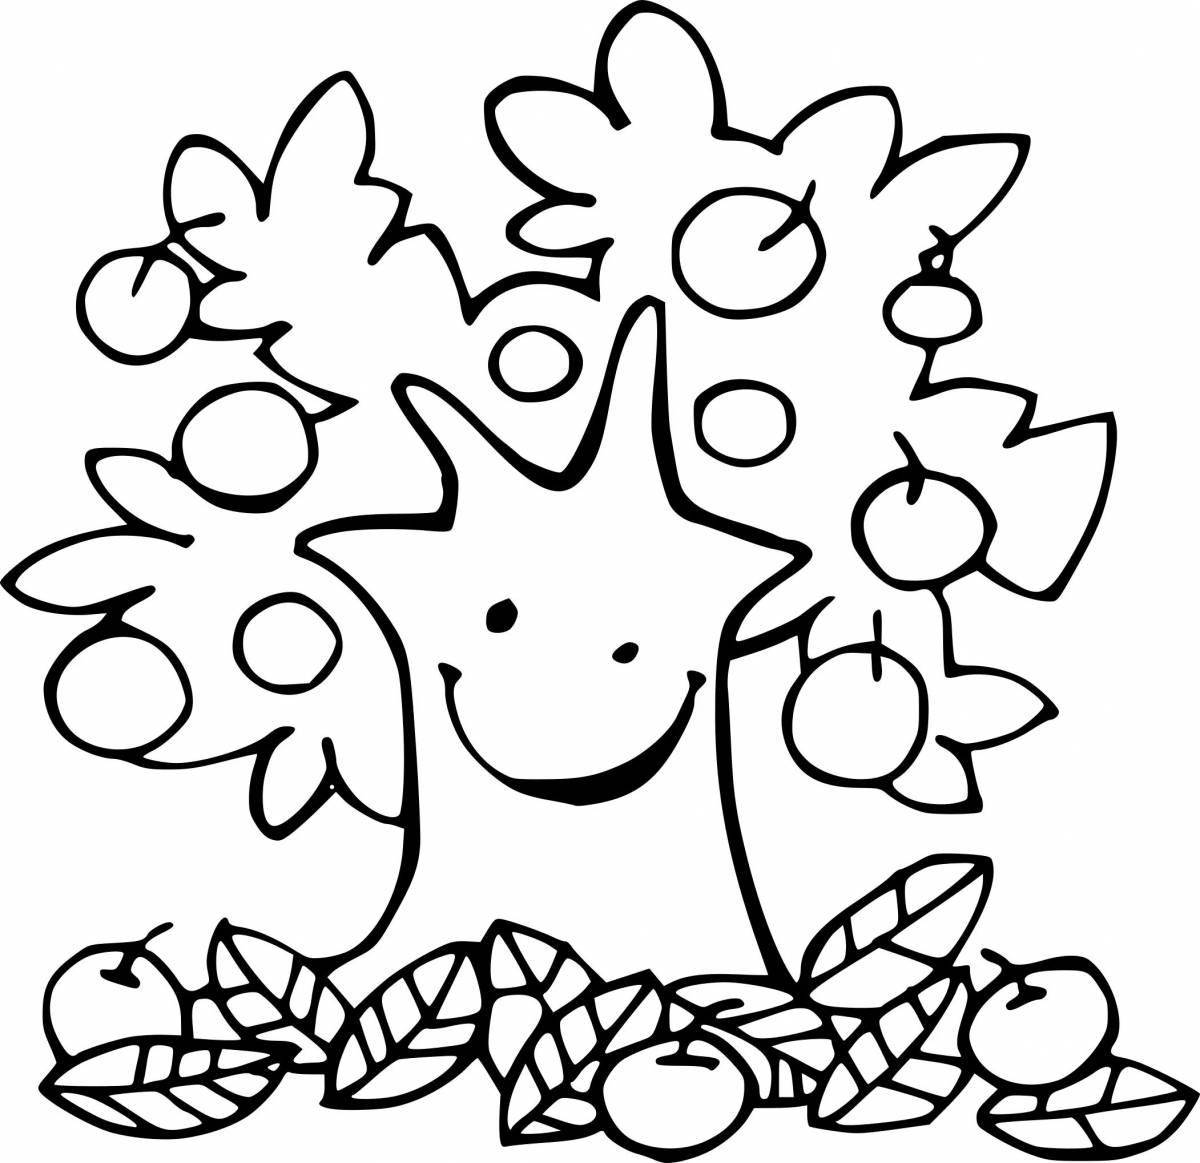 Coloring book blooming miracle tree